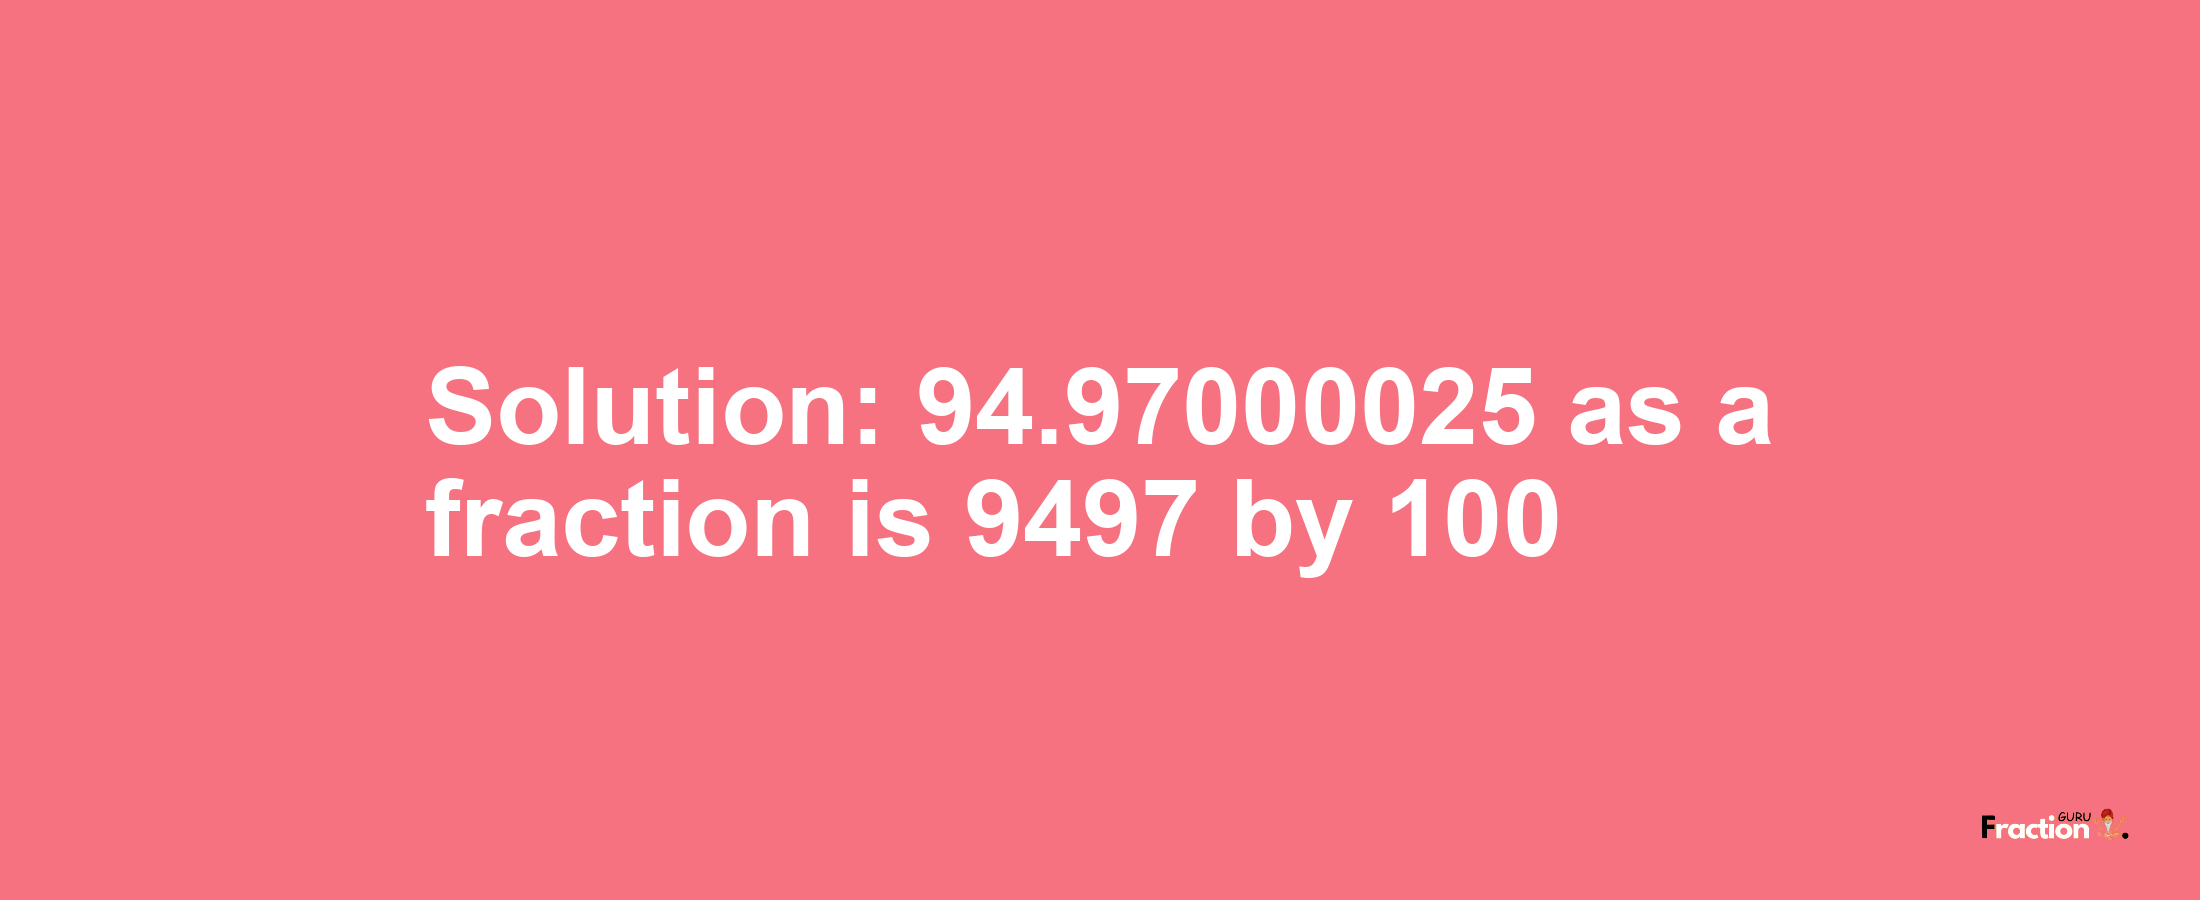 Solution:94.97000025 as a fraction is 9497/100